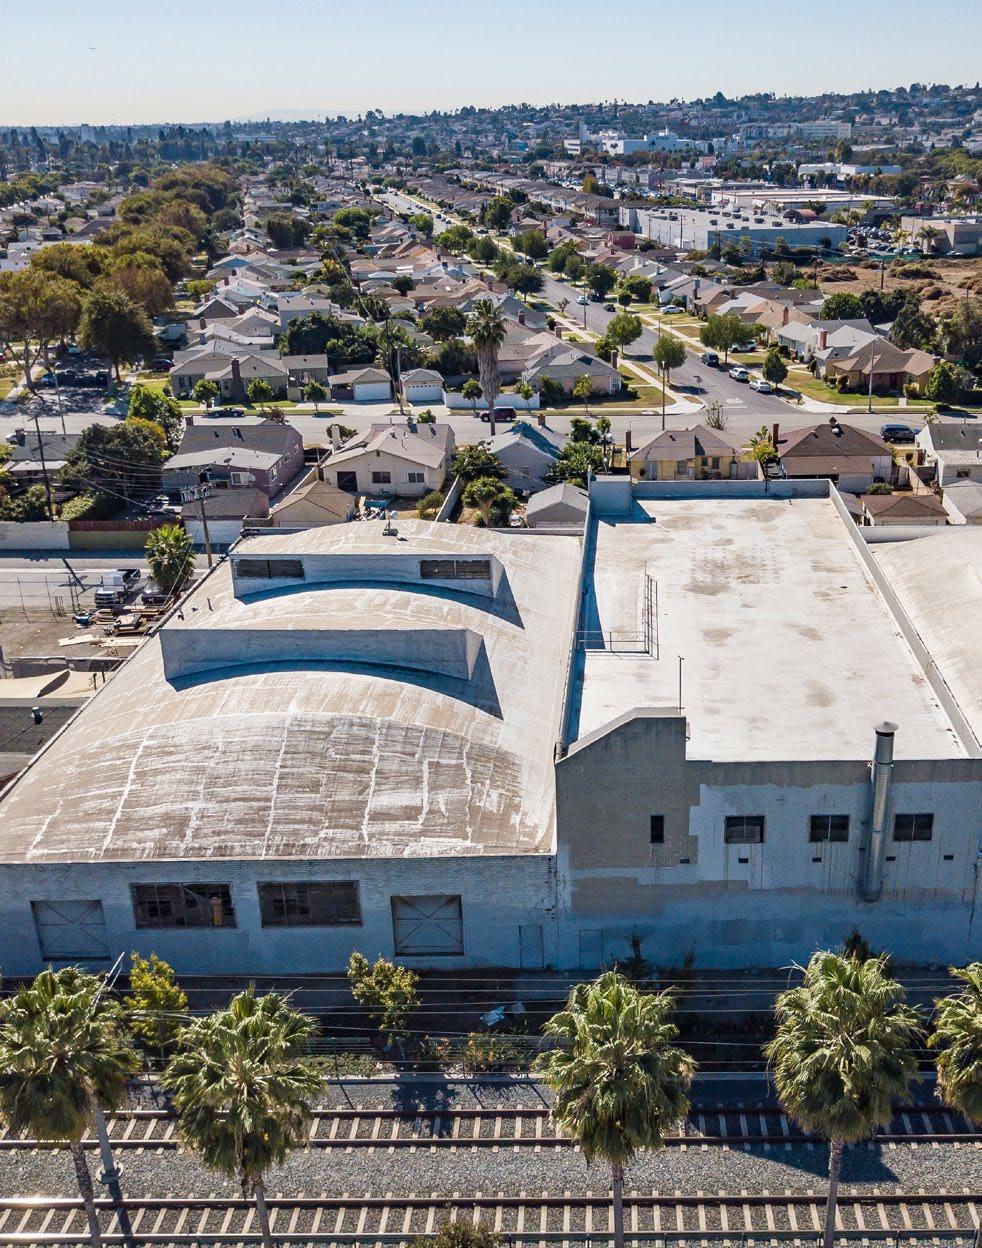 FOR LEASE CREATIVE OFFICE 3317 EXPOSITION PL LOS ANGELES CA 90018 NEIGHBORHOOD Beverly Hills West Hollywood Hollywood Silver Lake Echo Park Brentwood Santa Monica USC/ South DTLA 3317 Exposition Pl